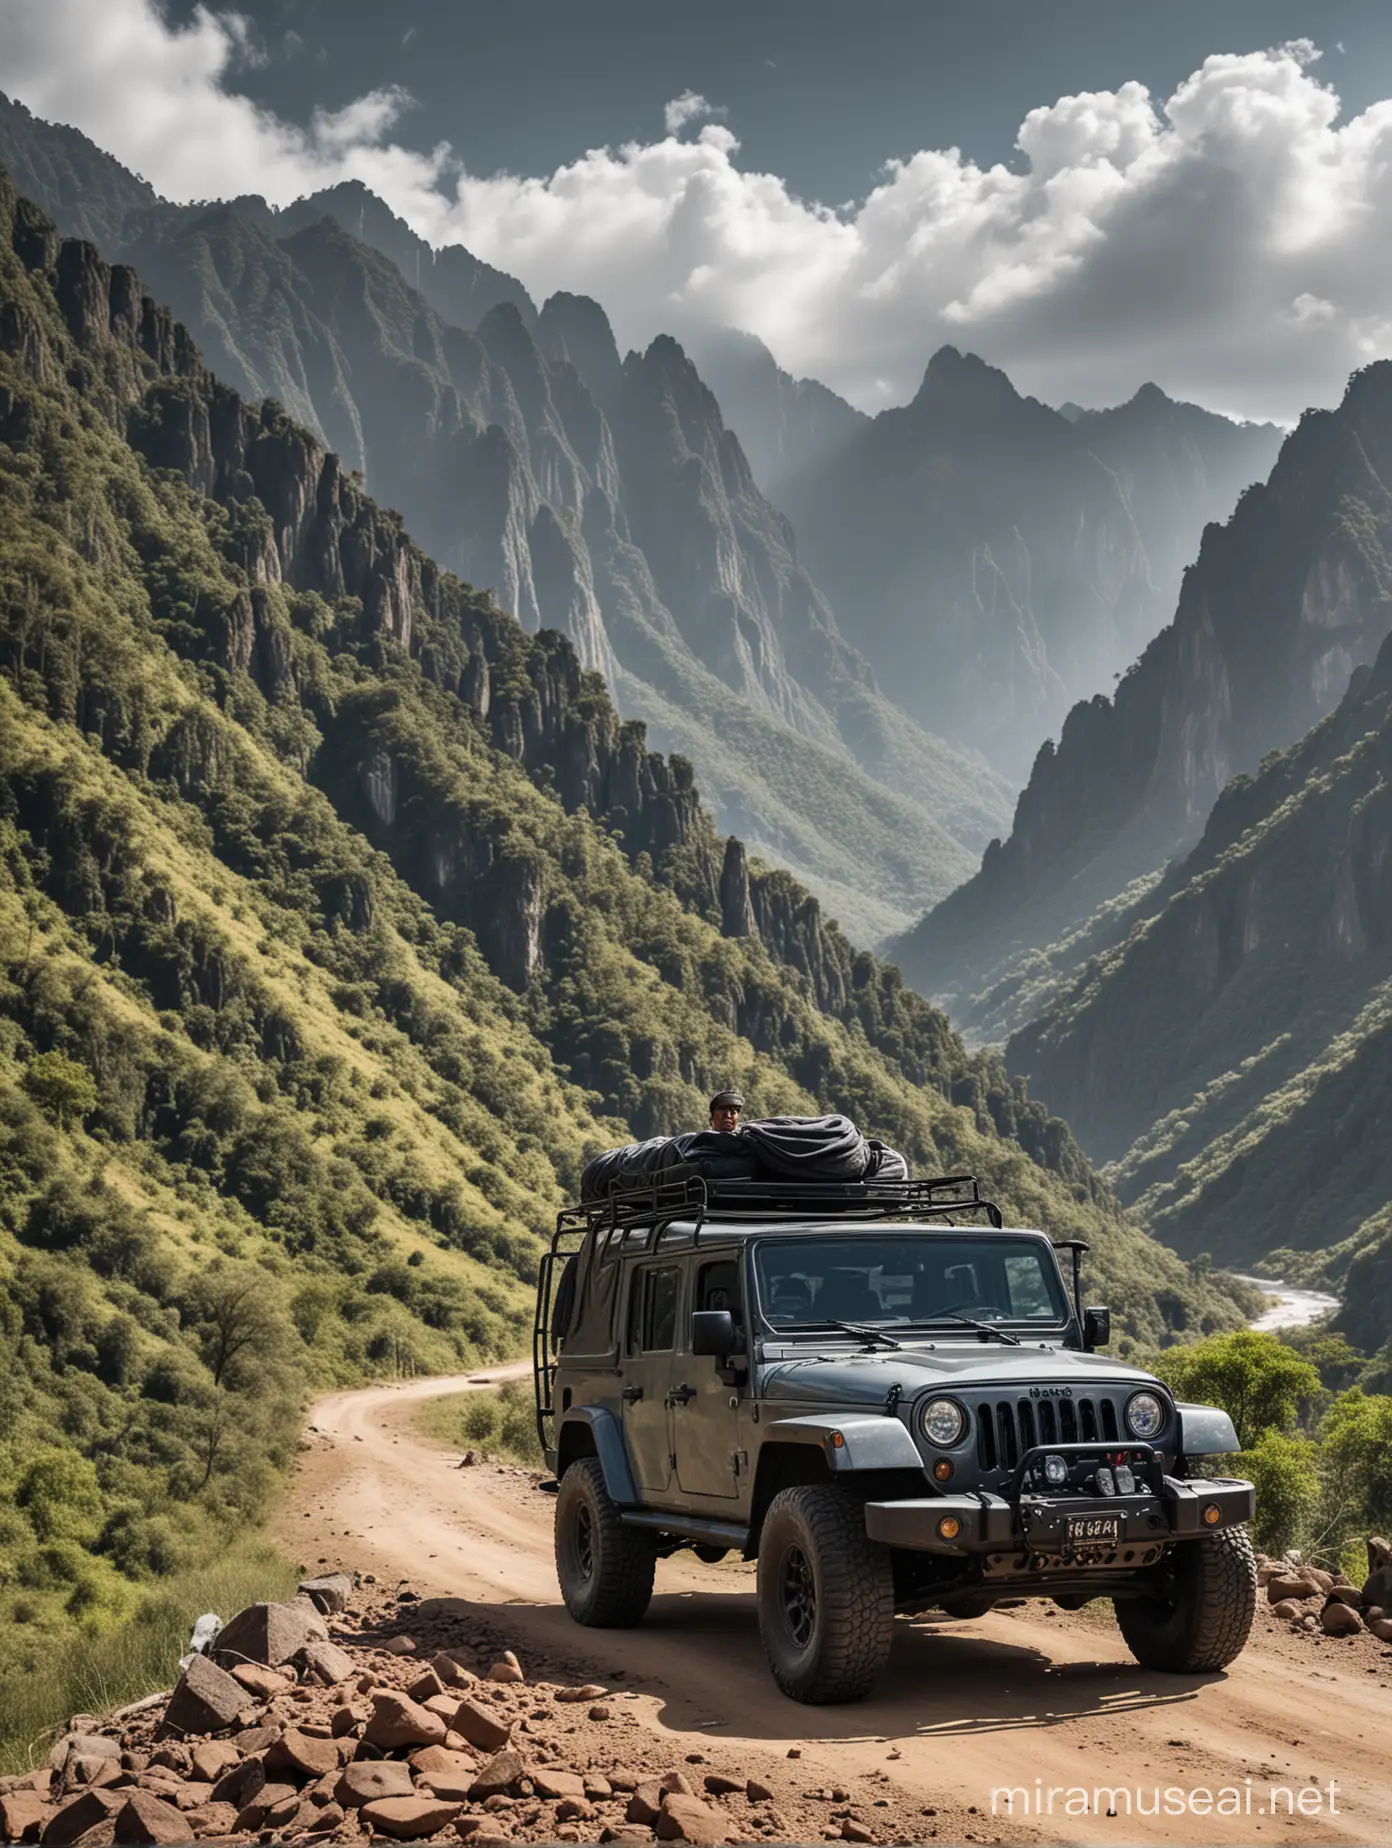 Indonesian Man with Black Jeep Against Mountain Views